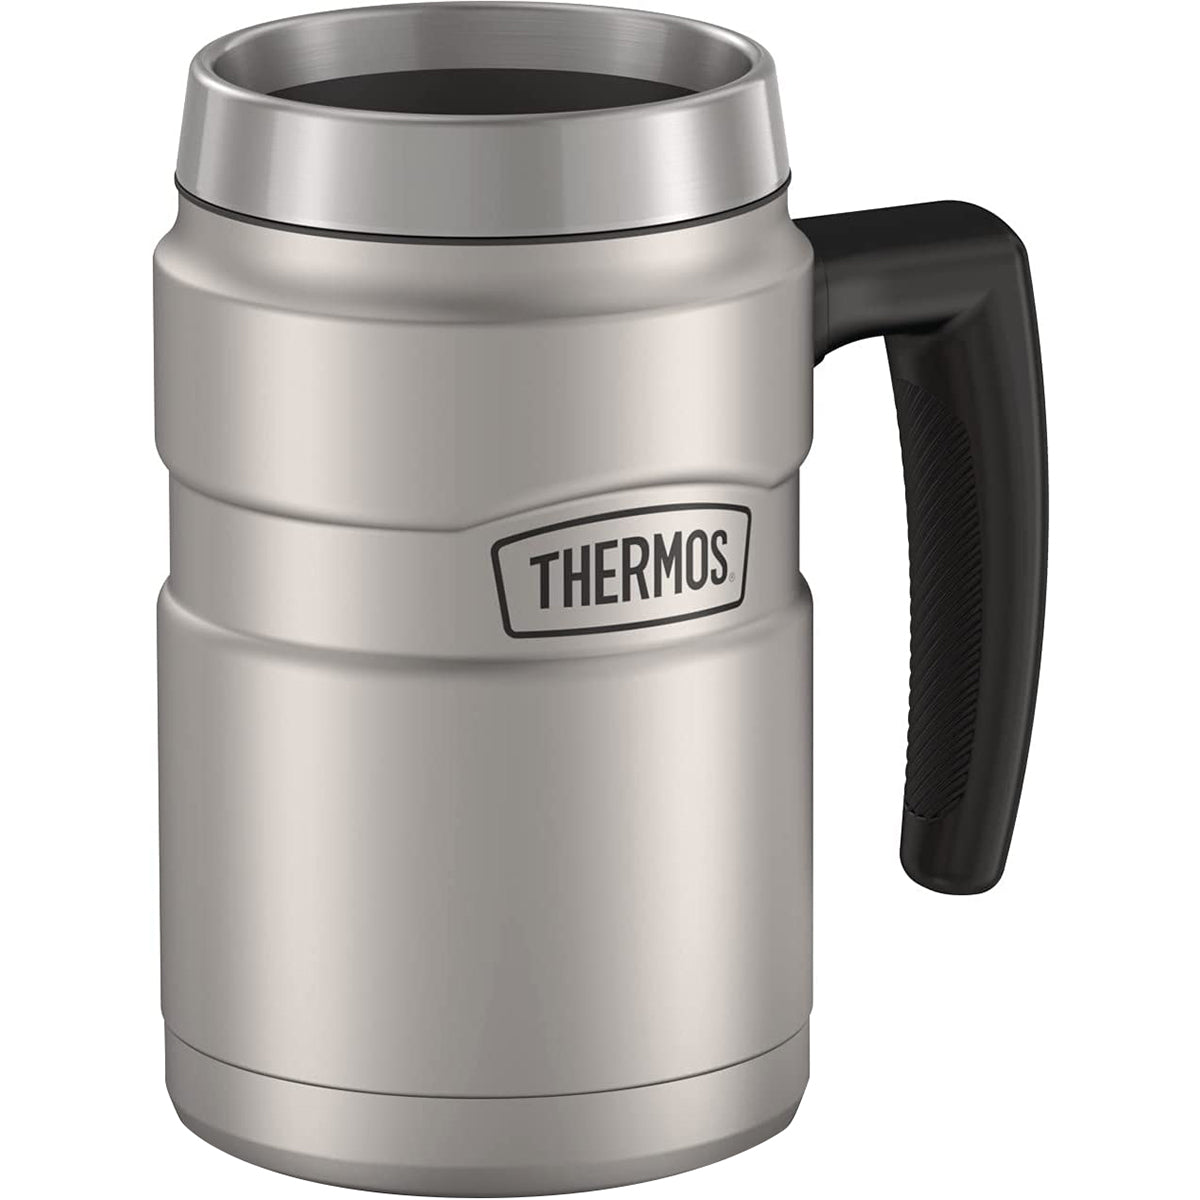 Thermos 16 oz. Stainless King Vacuum Insulated Stainless Steel Coffee Mug Thermos